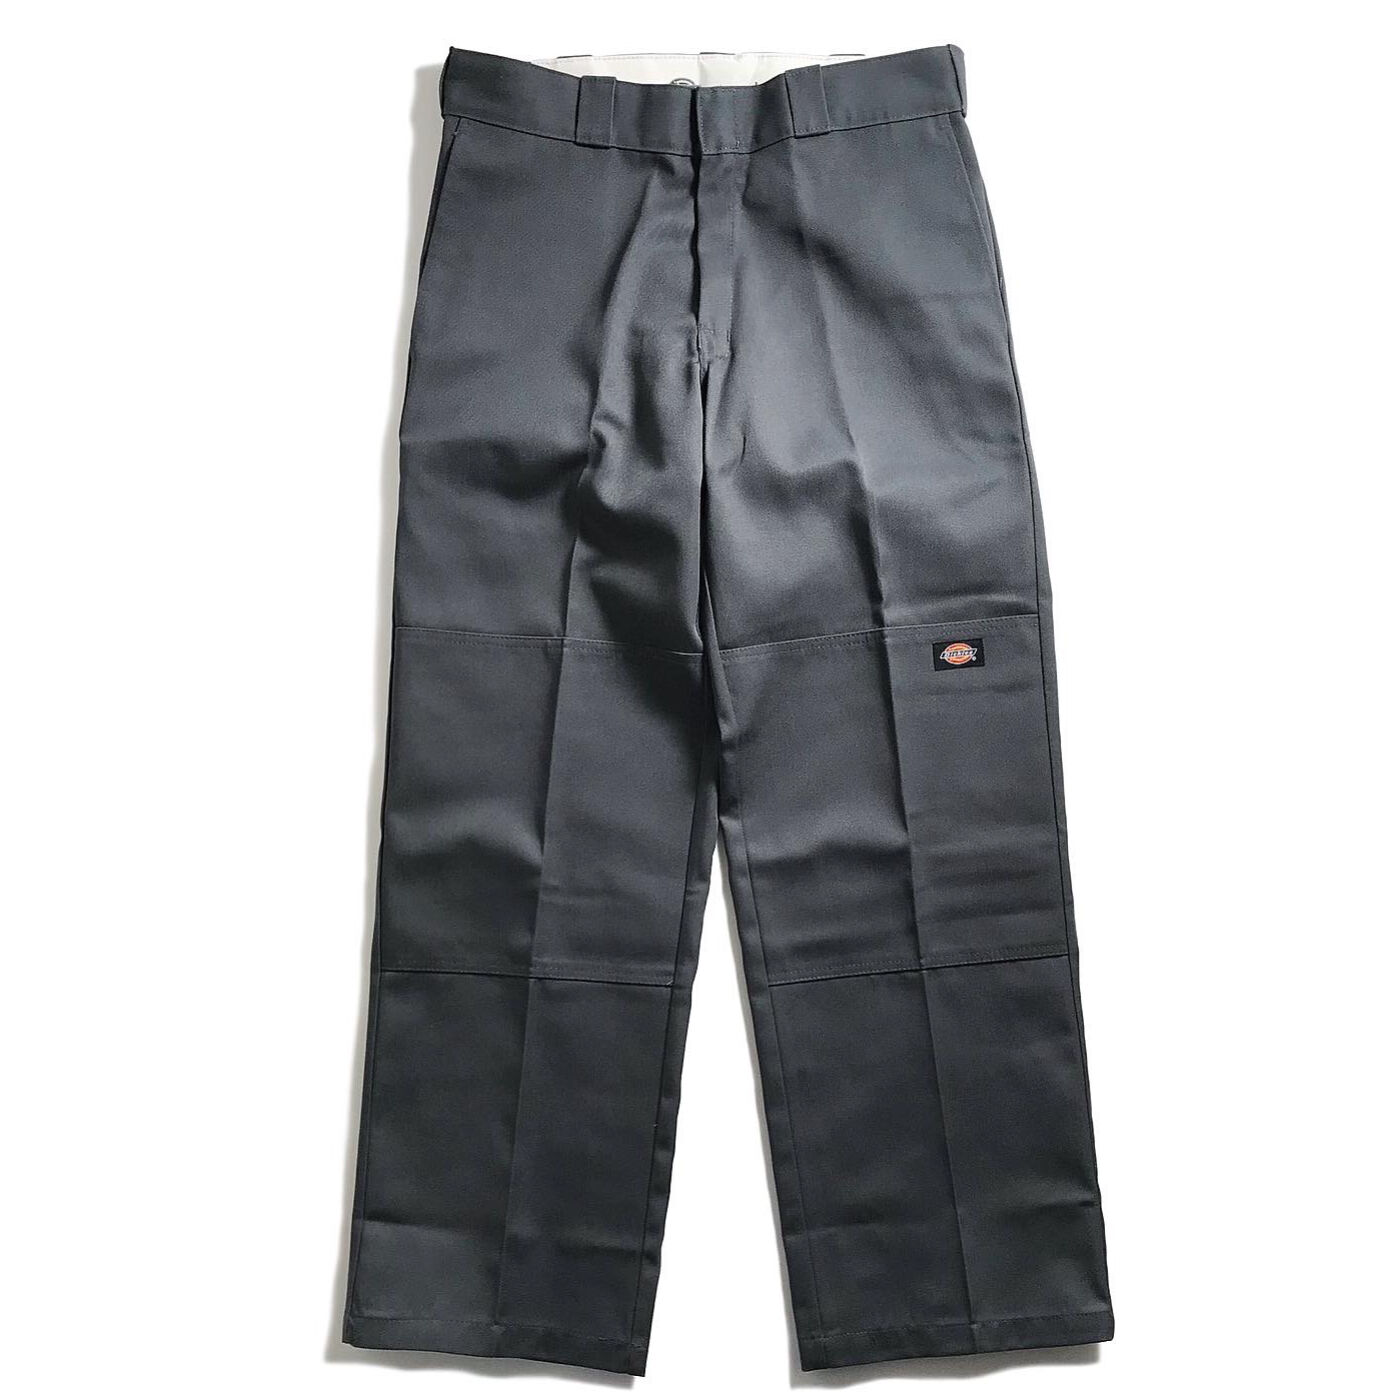 Dickies Loose Fit Double Knee Work Pants Charcoal / ディッキーズ 